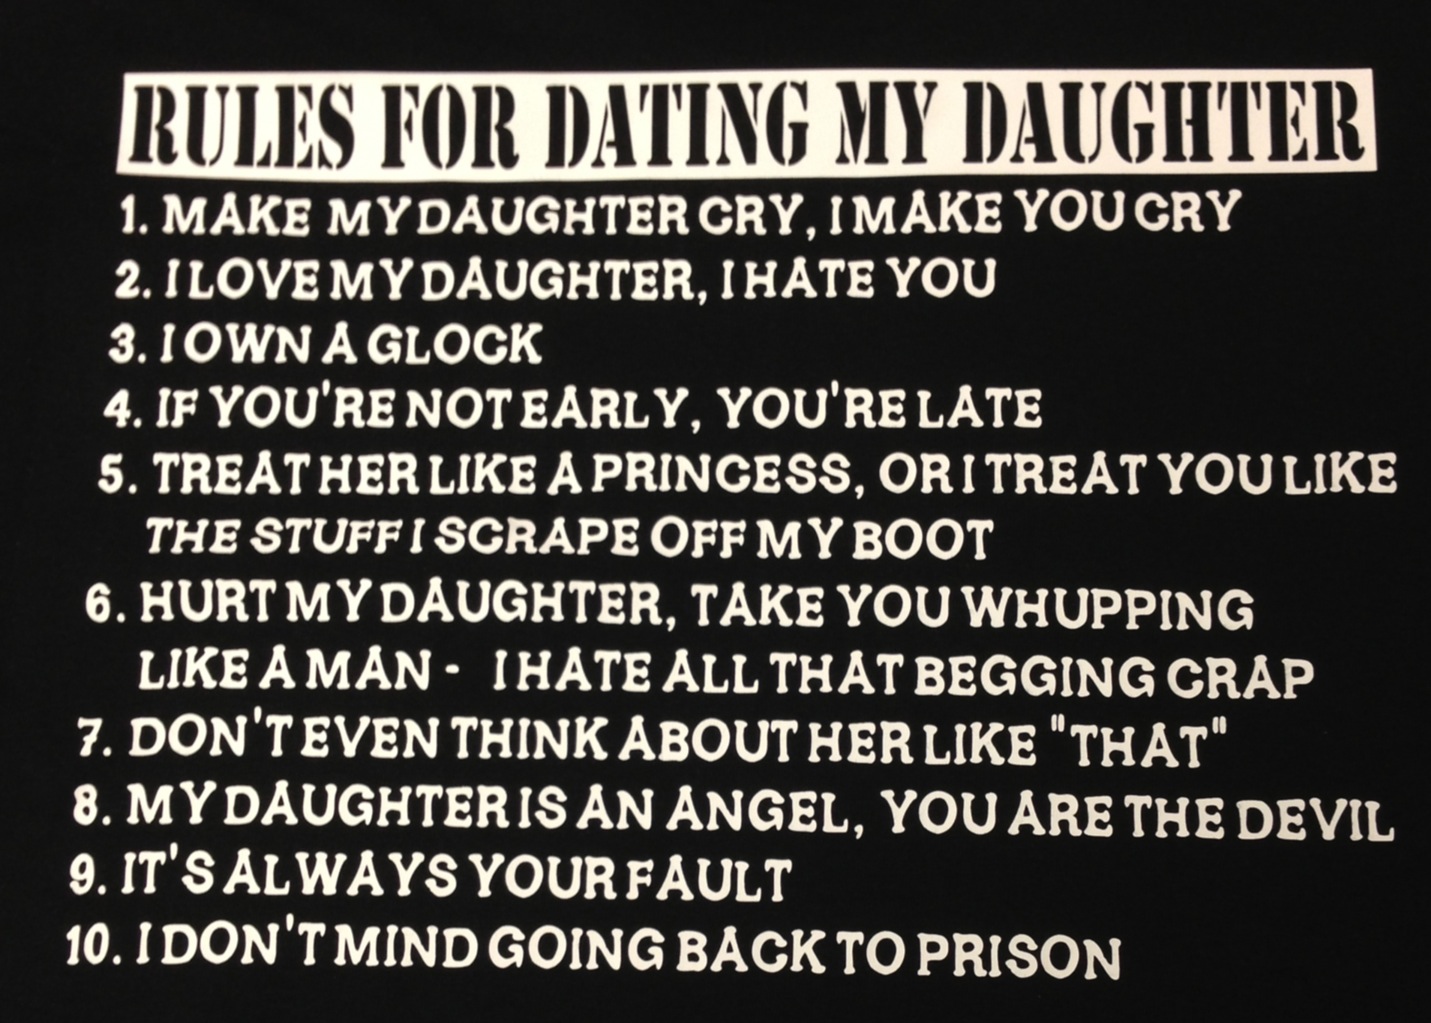 7 rules for dating my daughter